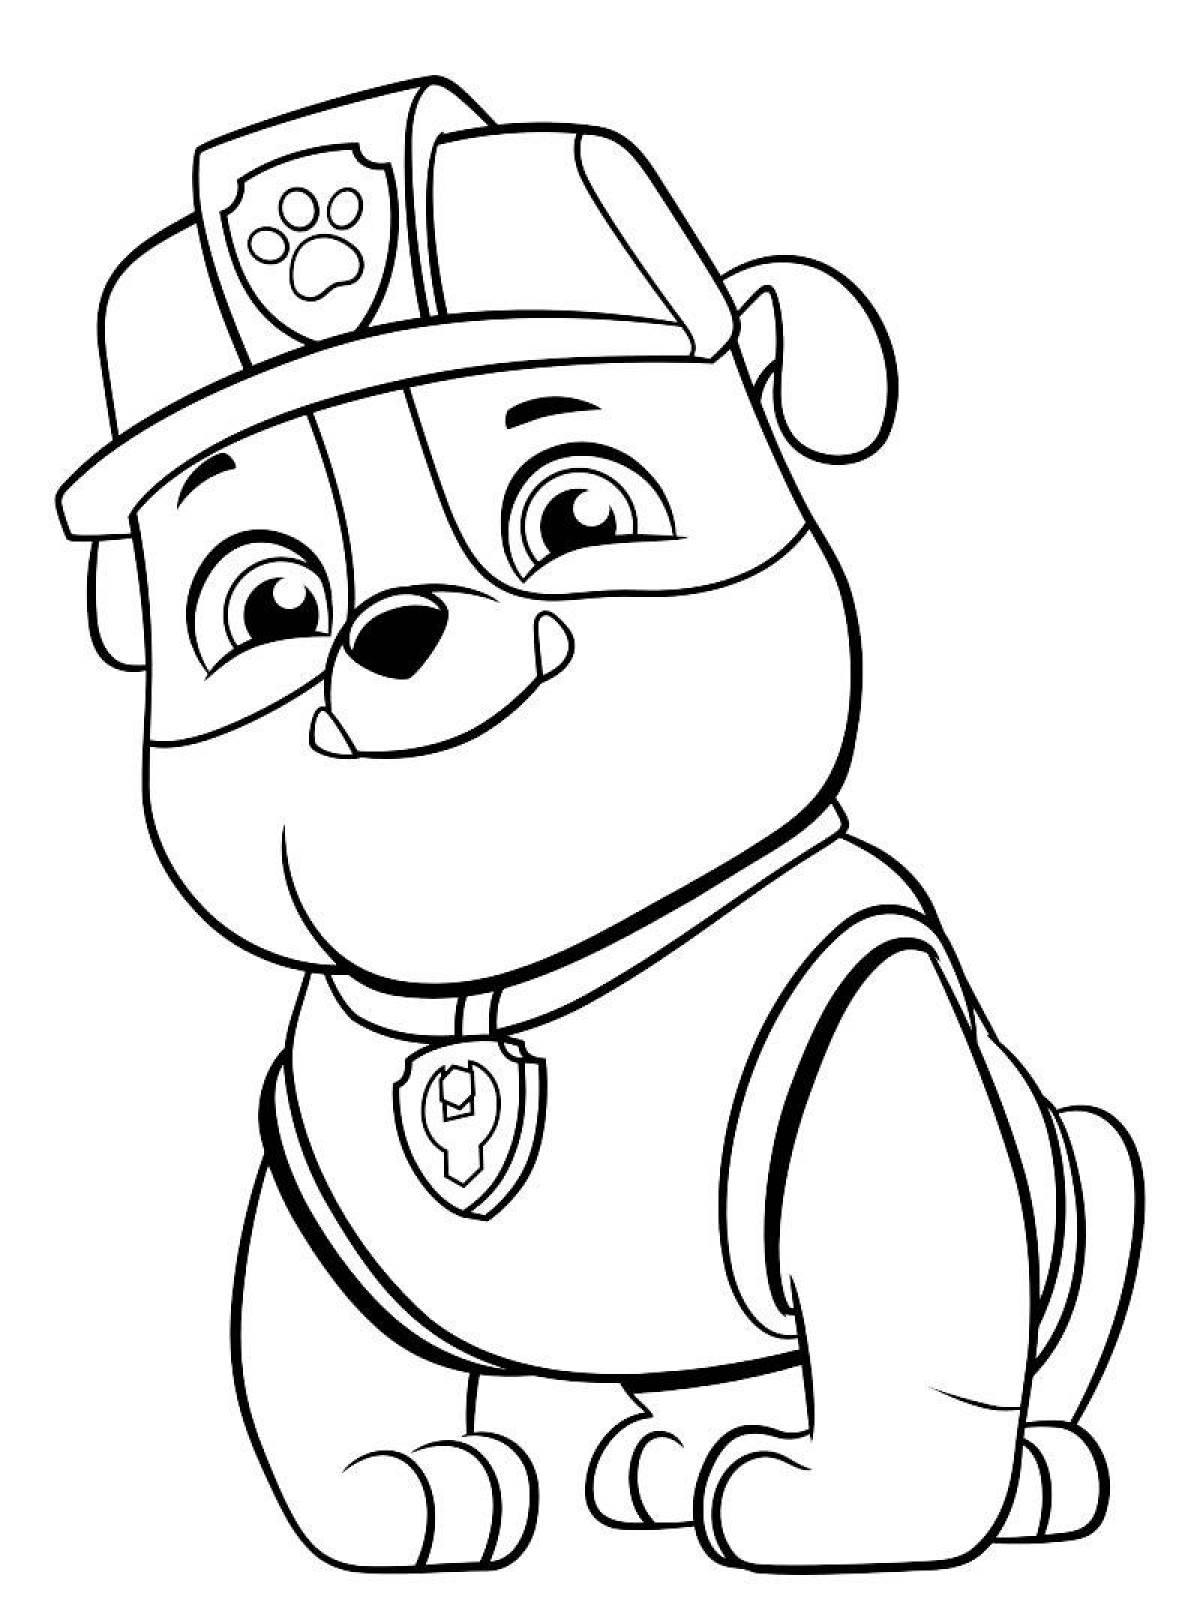 Impressive coloring paw patrol pictures